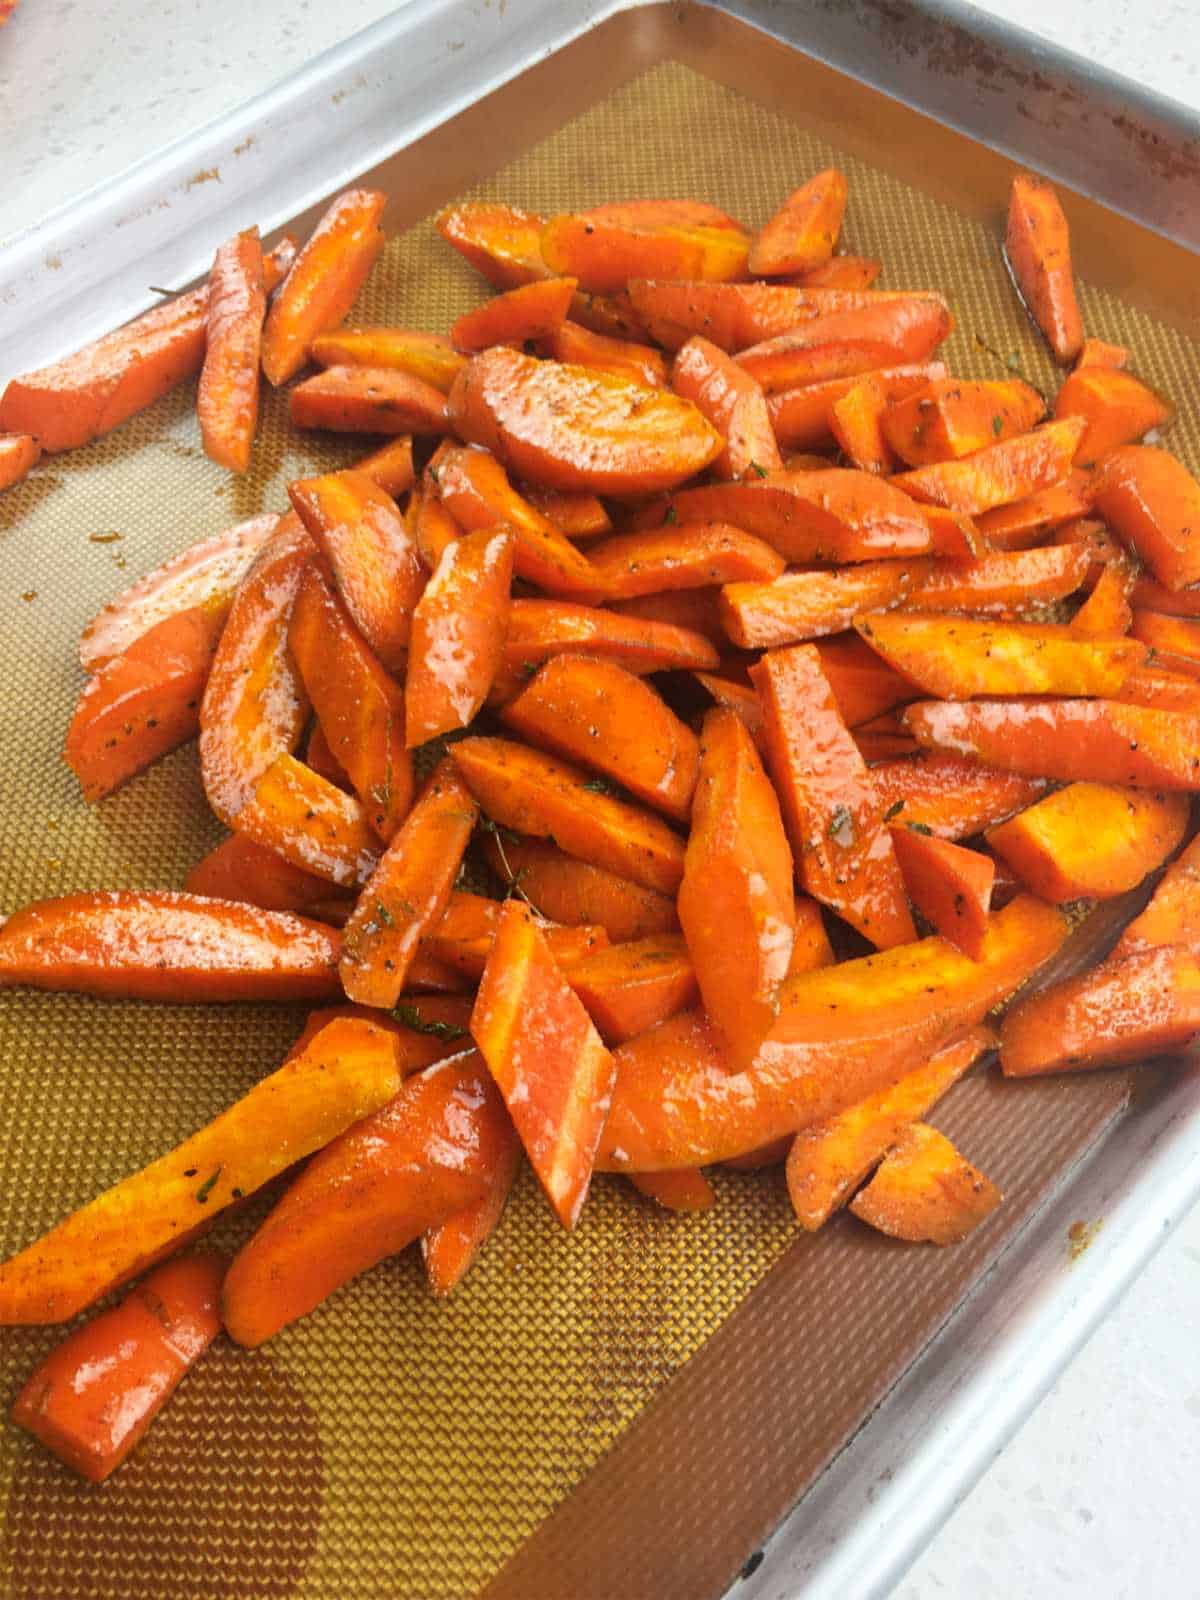 seasoned cut carrots spread out on a sheet pan for roasting.